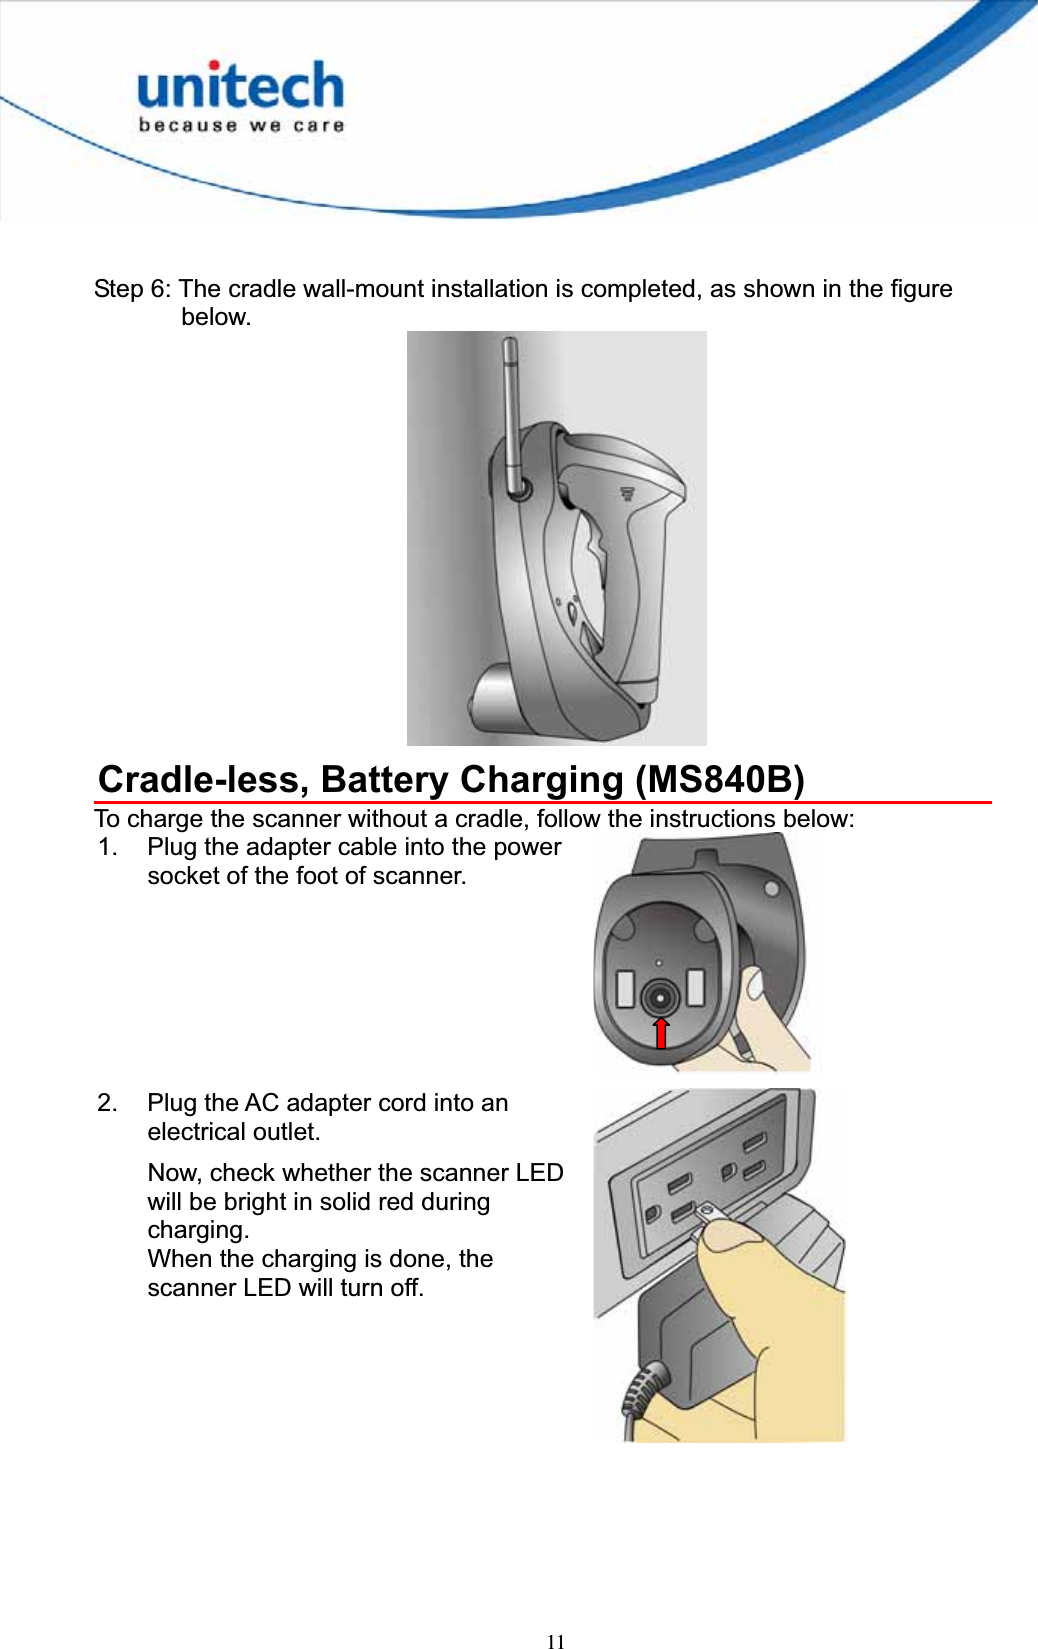 11Step 6: The cradle wall-mount installation is completed, as shown in the figure below. Cradle-less, Battery Charging (MS840B) To charge the scanner without a cradle, follow the instructions below: 1.  Plug the adapter cable into the power socket of the foot of scanner. 2.  Plug the AC adapter cord into an electrical outlet. Now, check whether the scanner LED will be bright in solid red during charging.When the charging is done, the scanner LED will turn off. 